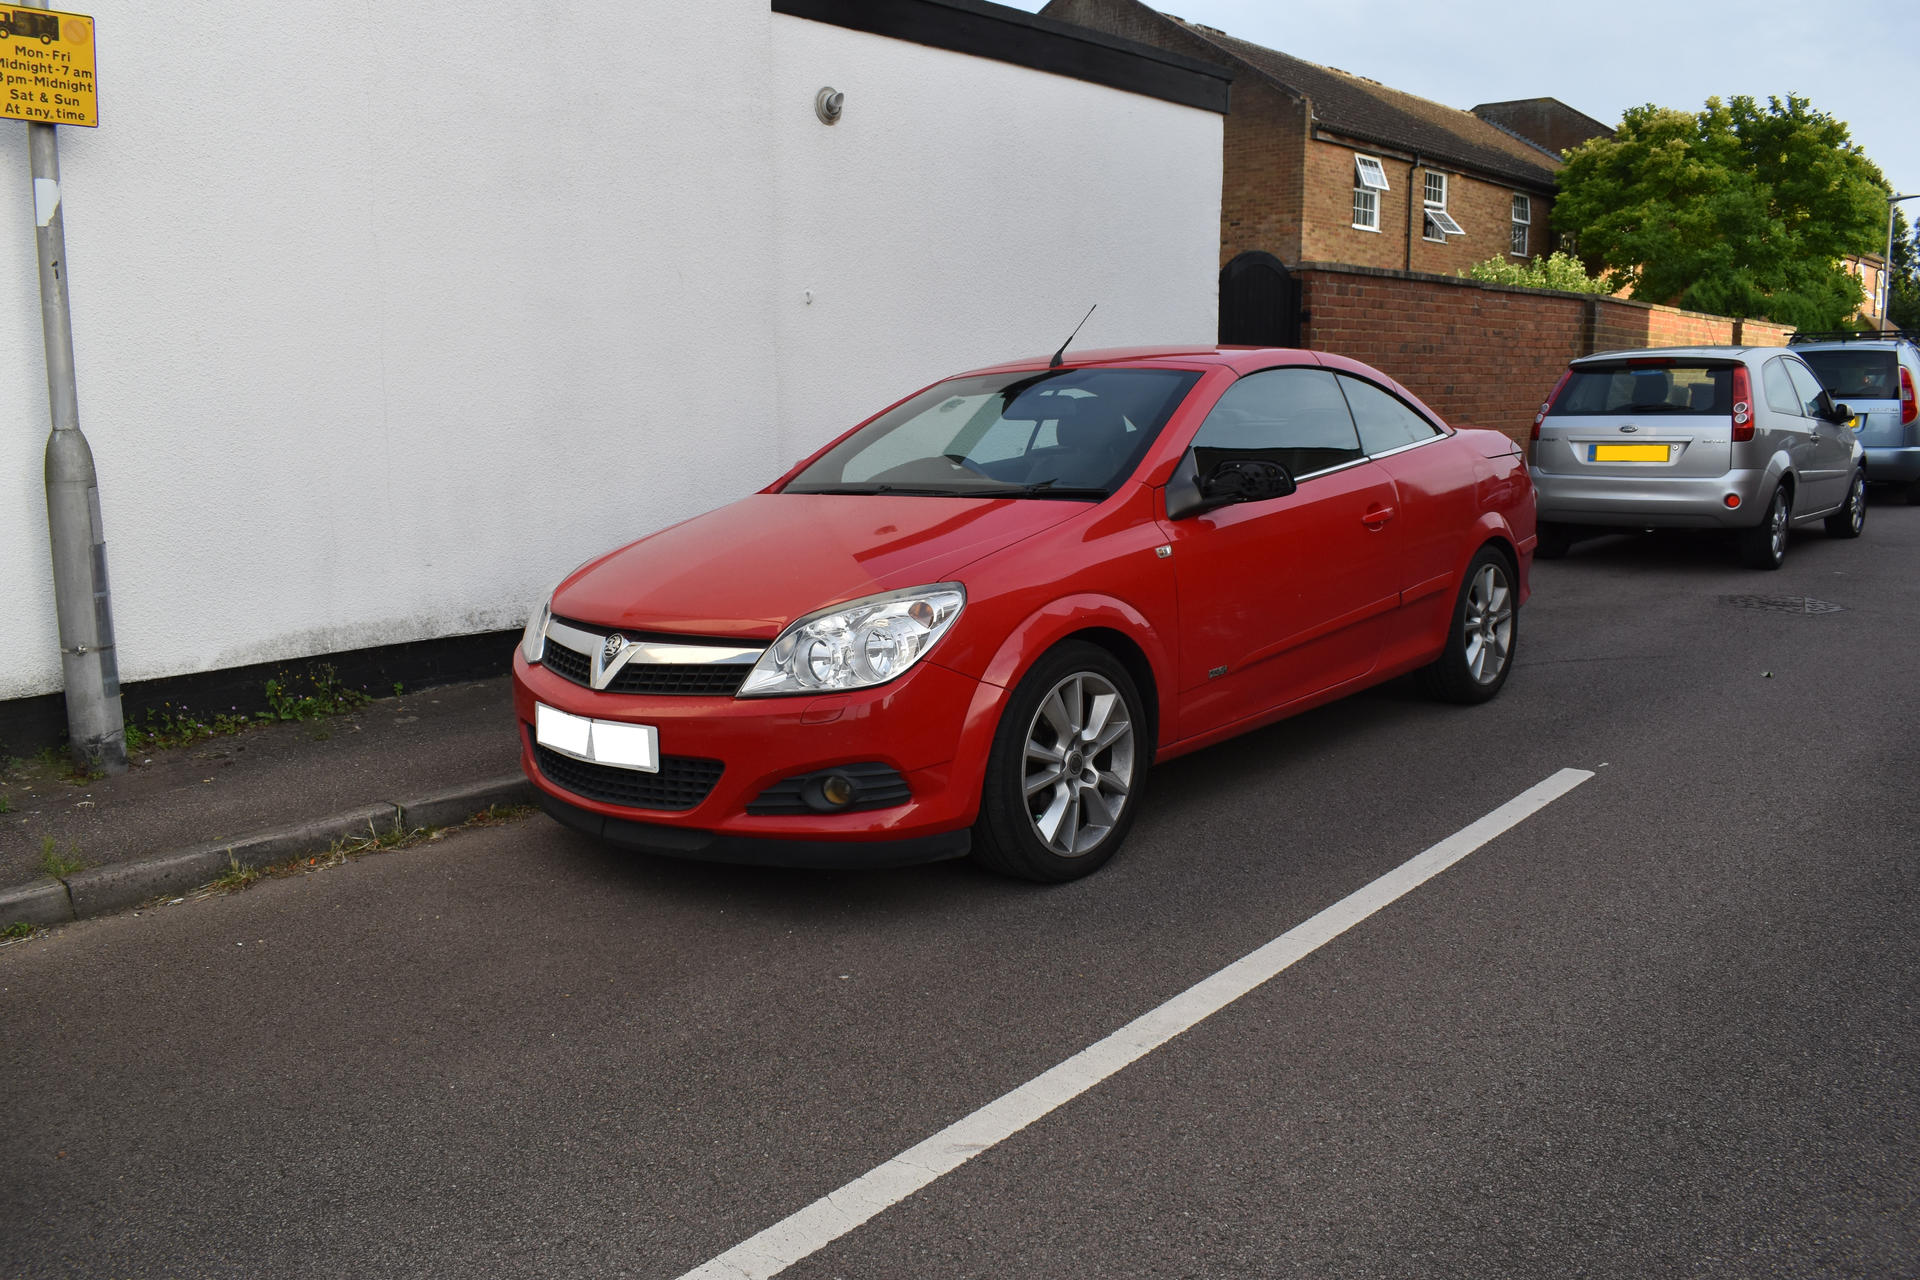 GM Astra  Vauxhall, Vauxhall astra, Coupe